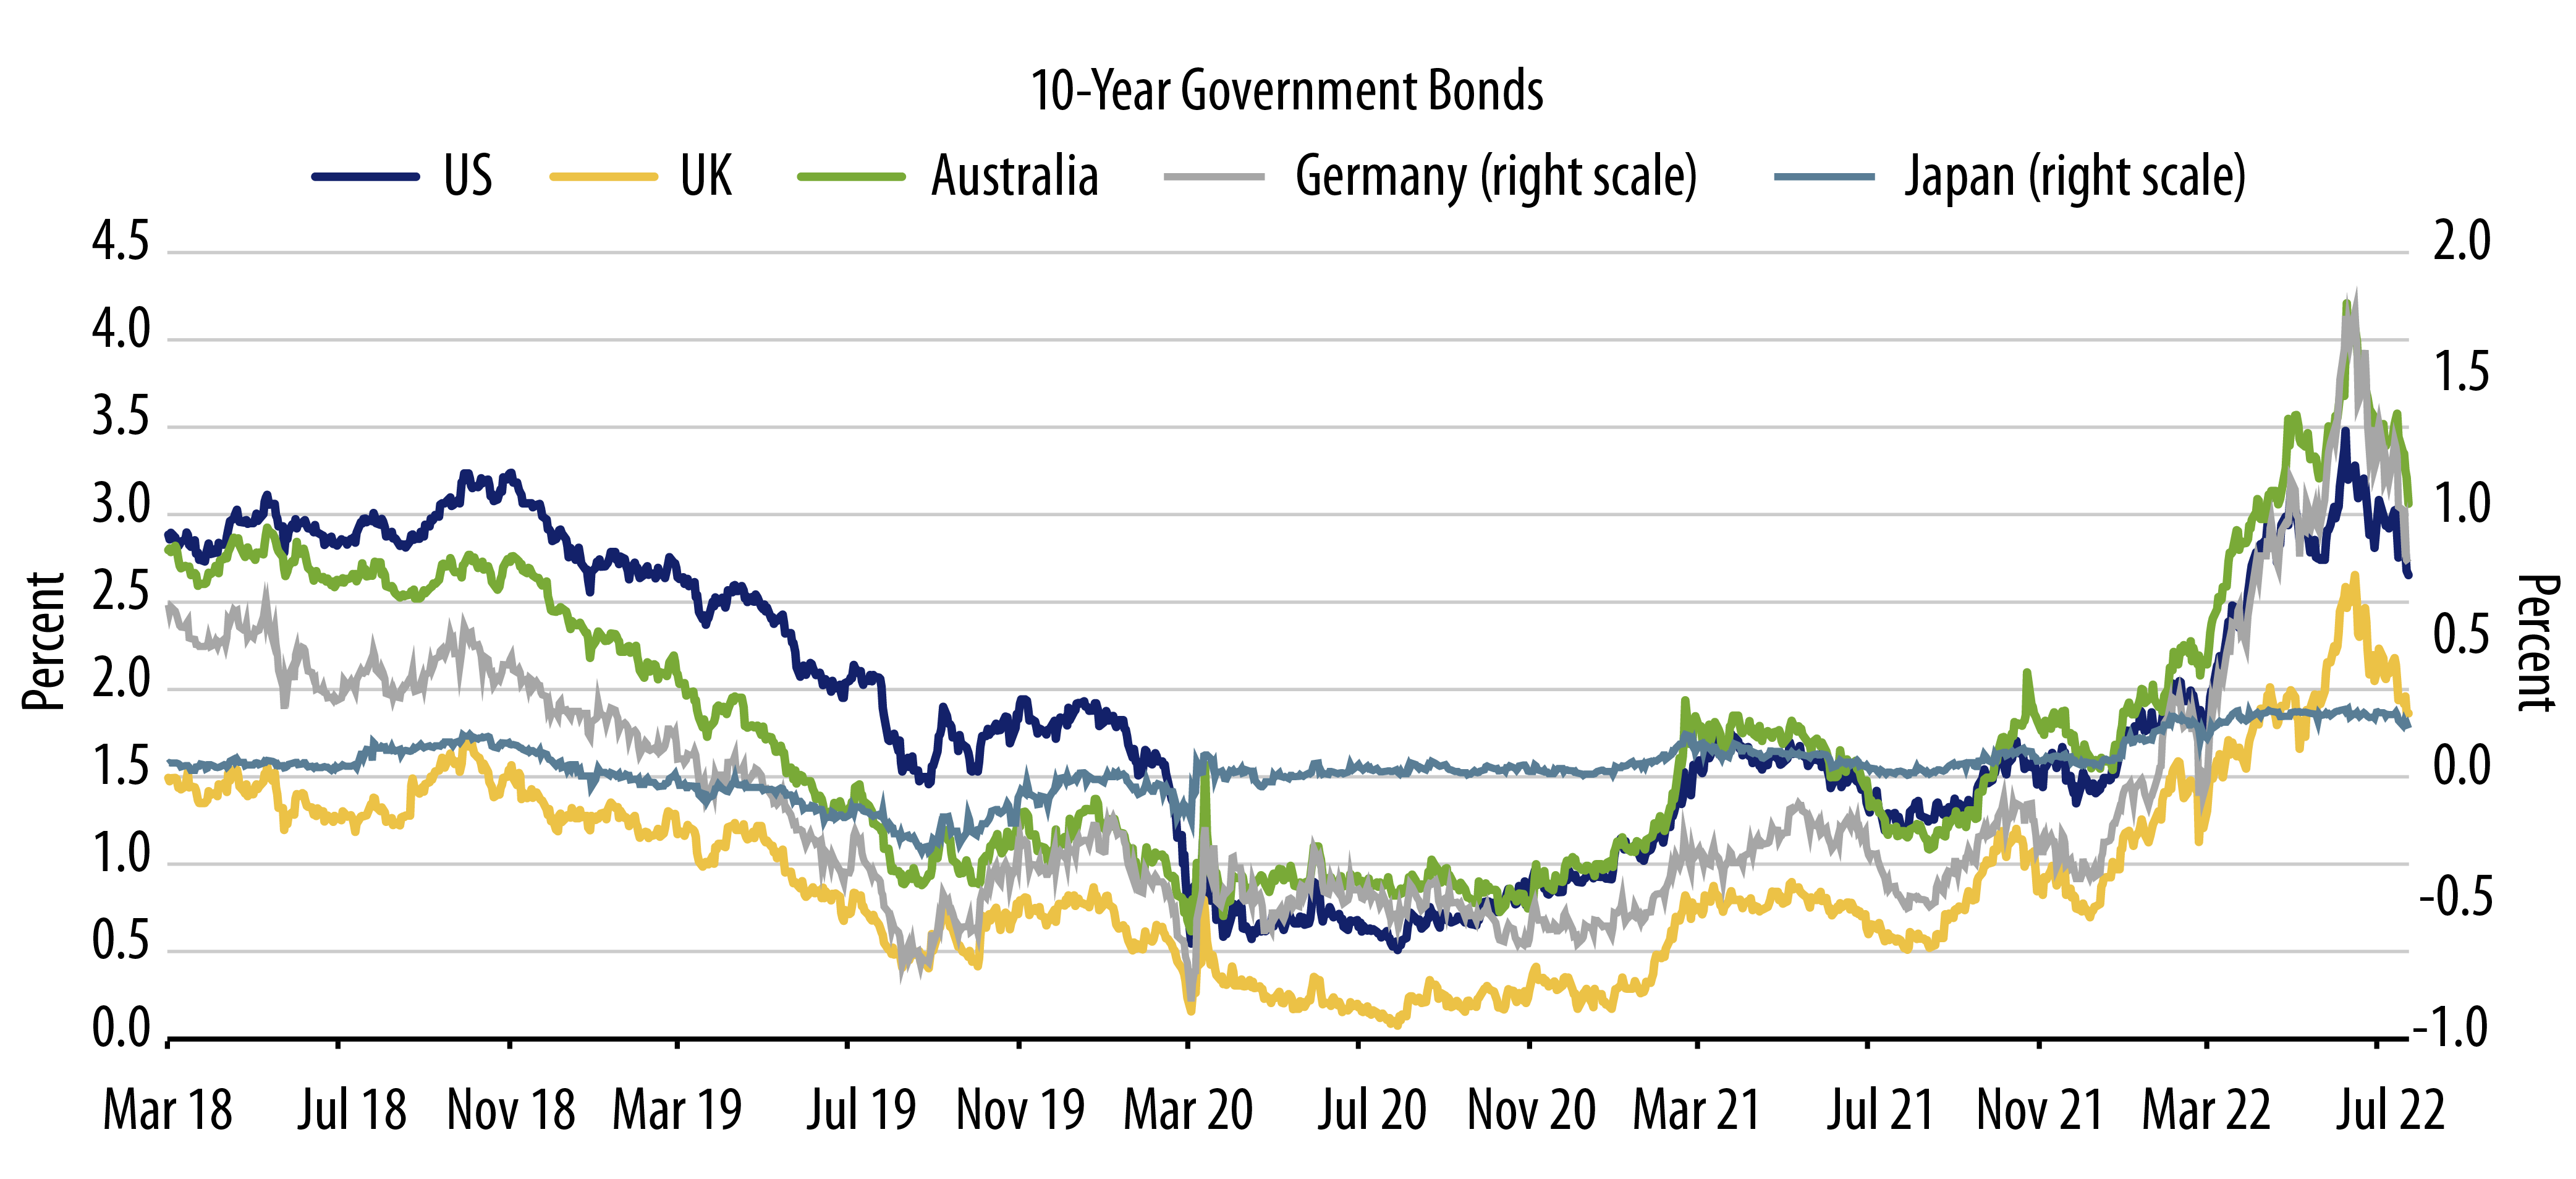 Global Government Bonds Have Materially Repriced This Year